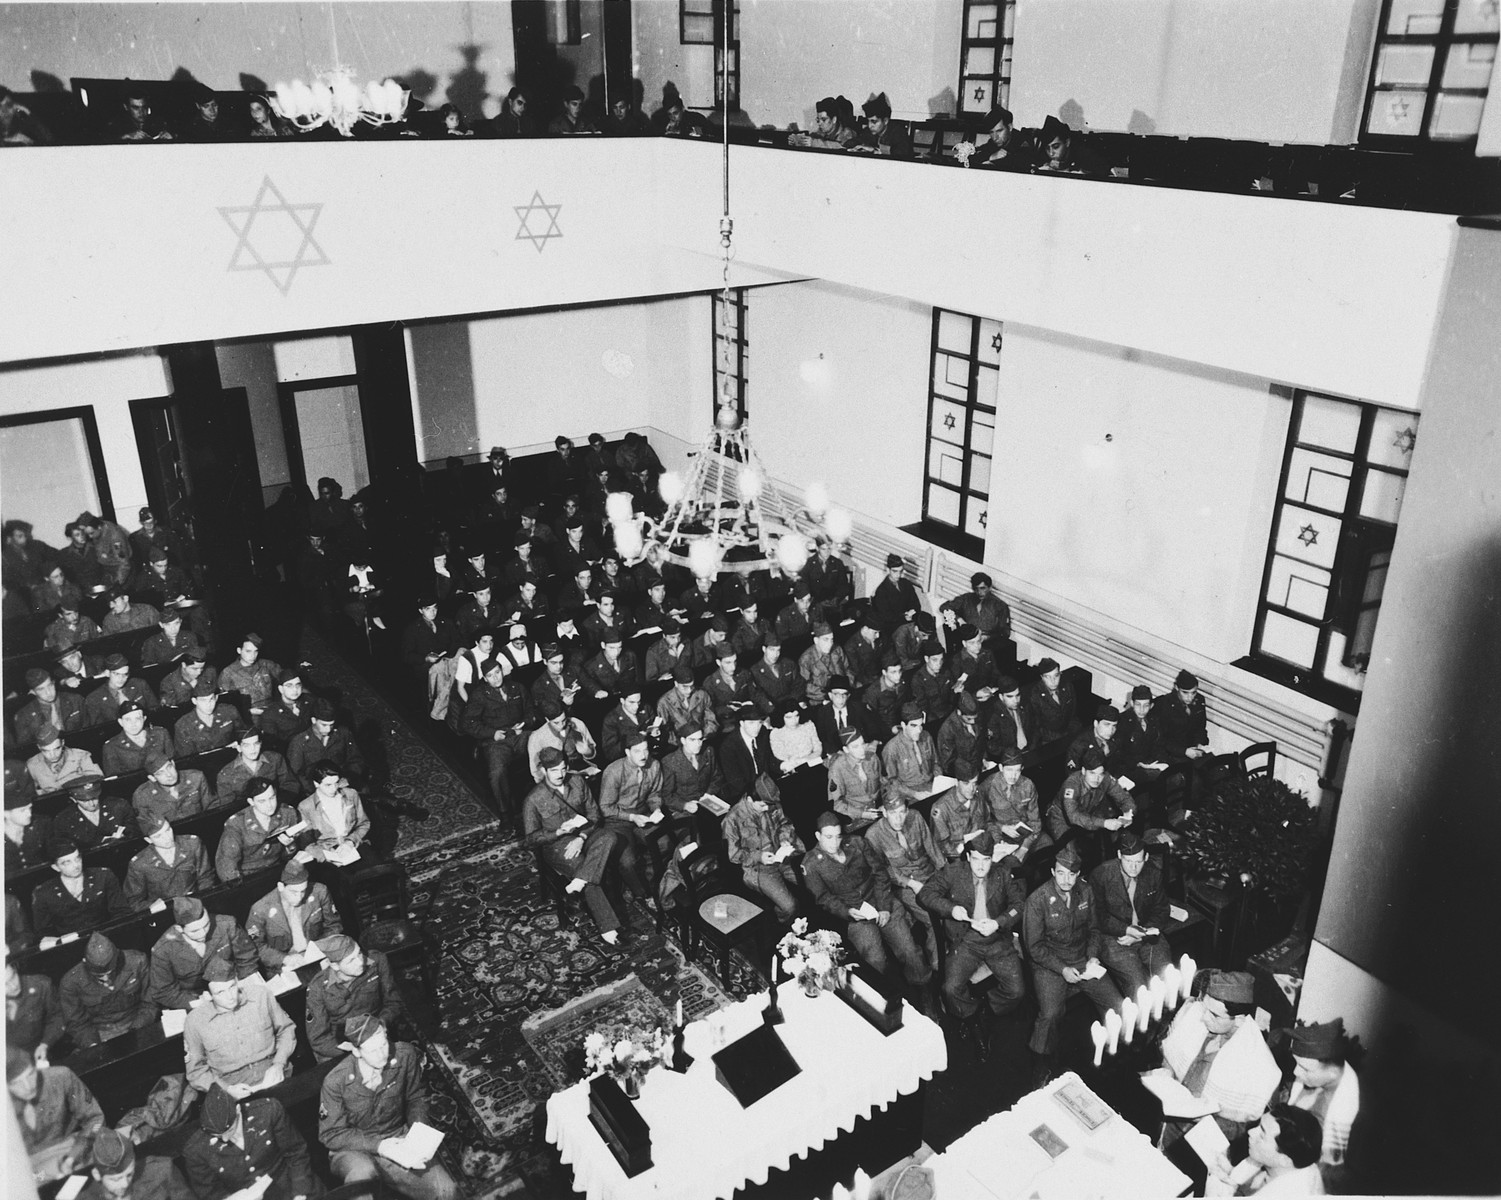 Jewish servicemen attend a religious service in the synagogue in Bad Nauheim, Germany.

Gisela Eckstein was among the survivors in attendance.